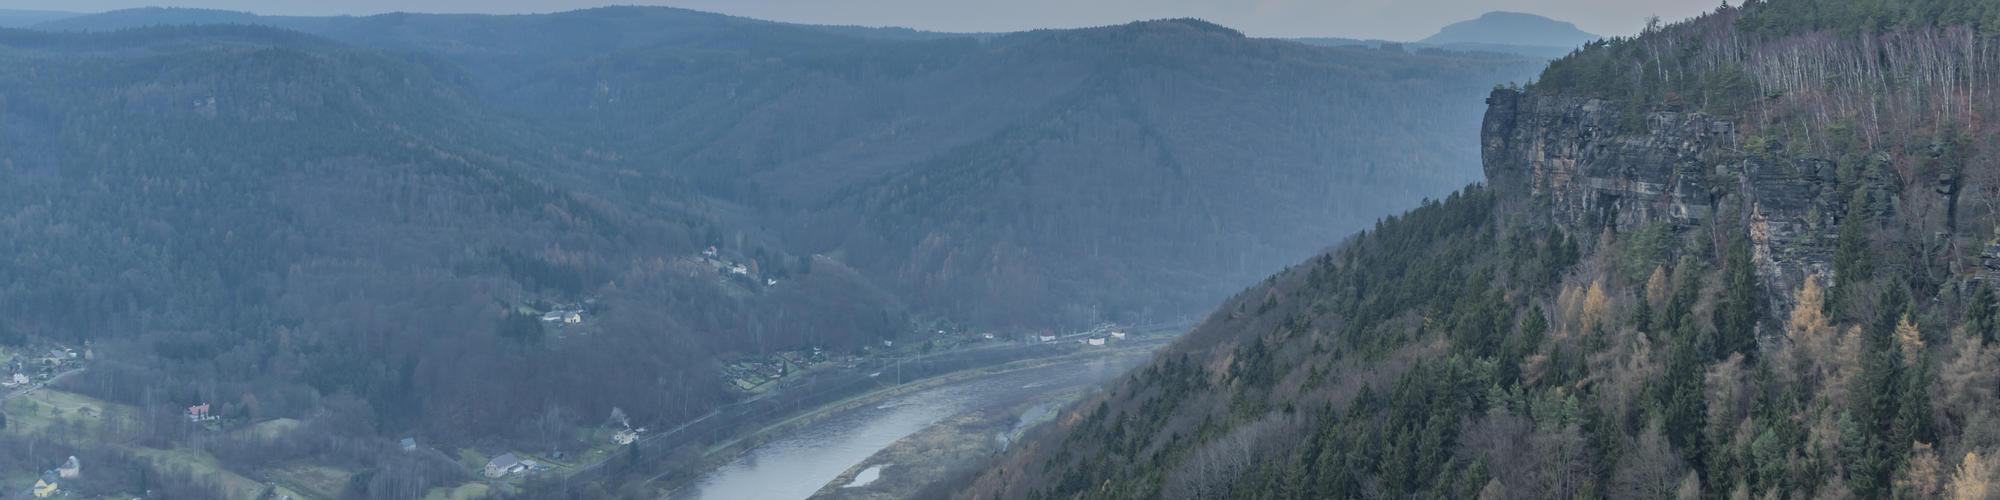 ruzova view point rock over valley river labe ruzova view point rock over valley river Labe autumn evening